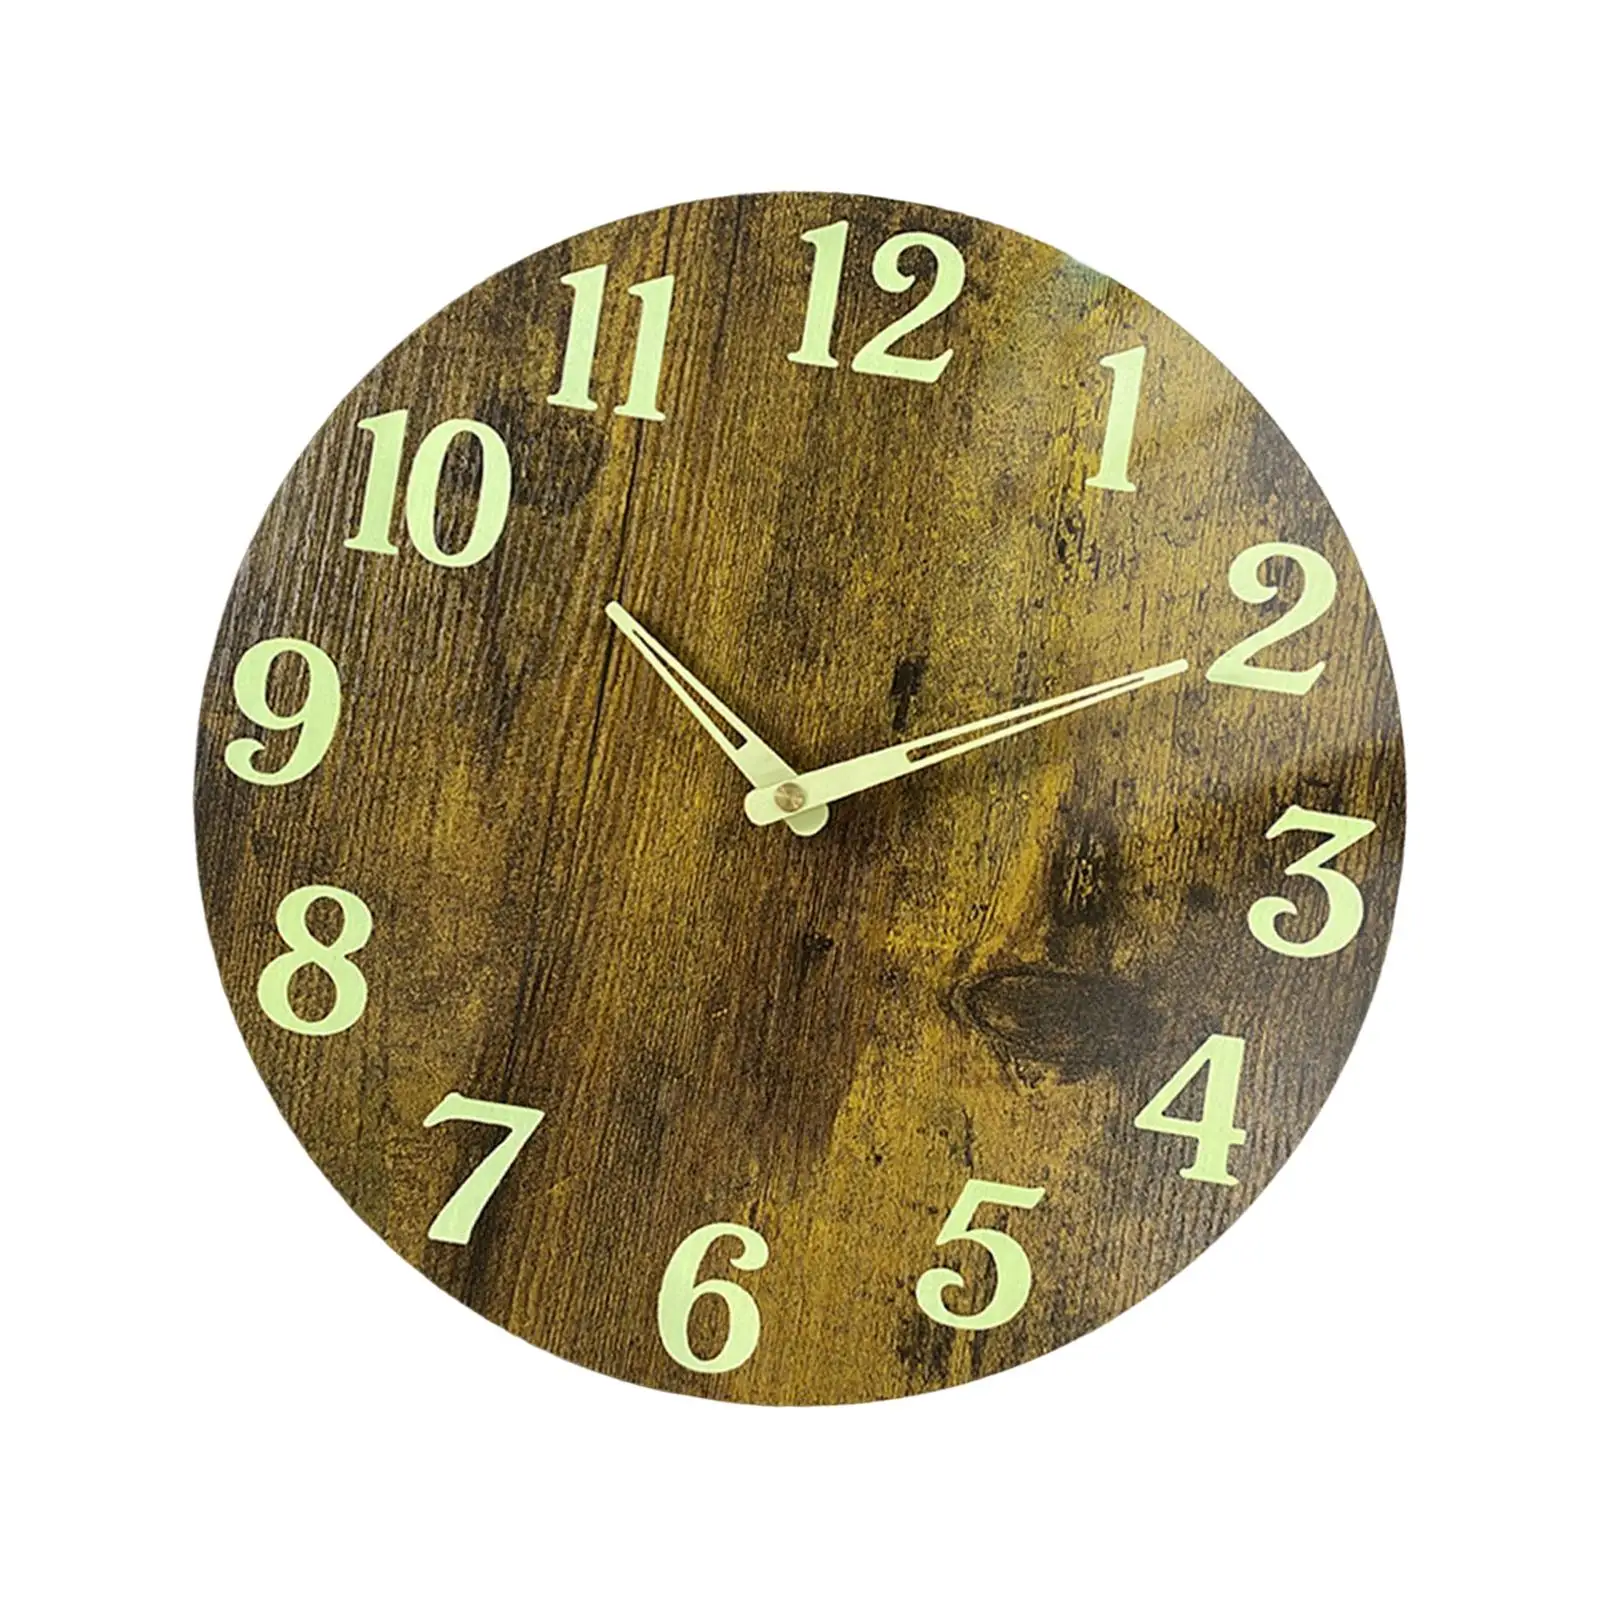 Wall Clock Quiet 12``/30cm Creative Wooden Glow The Dark Battery Operated Round Modern for Office Hotel Home Dorm Decoration